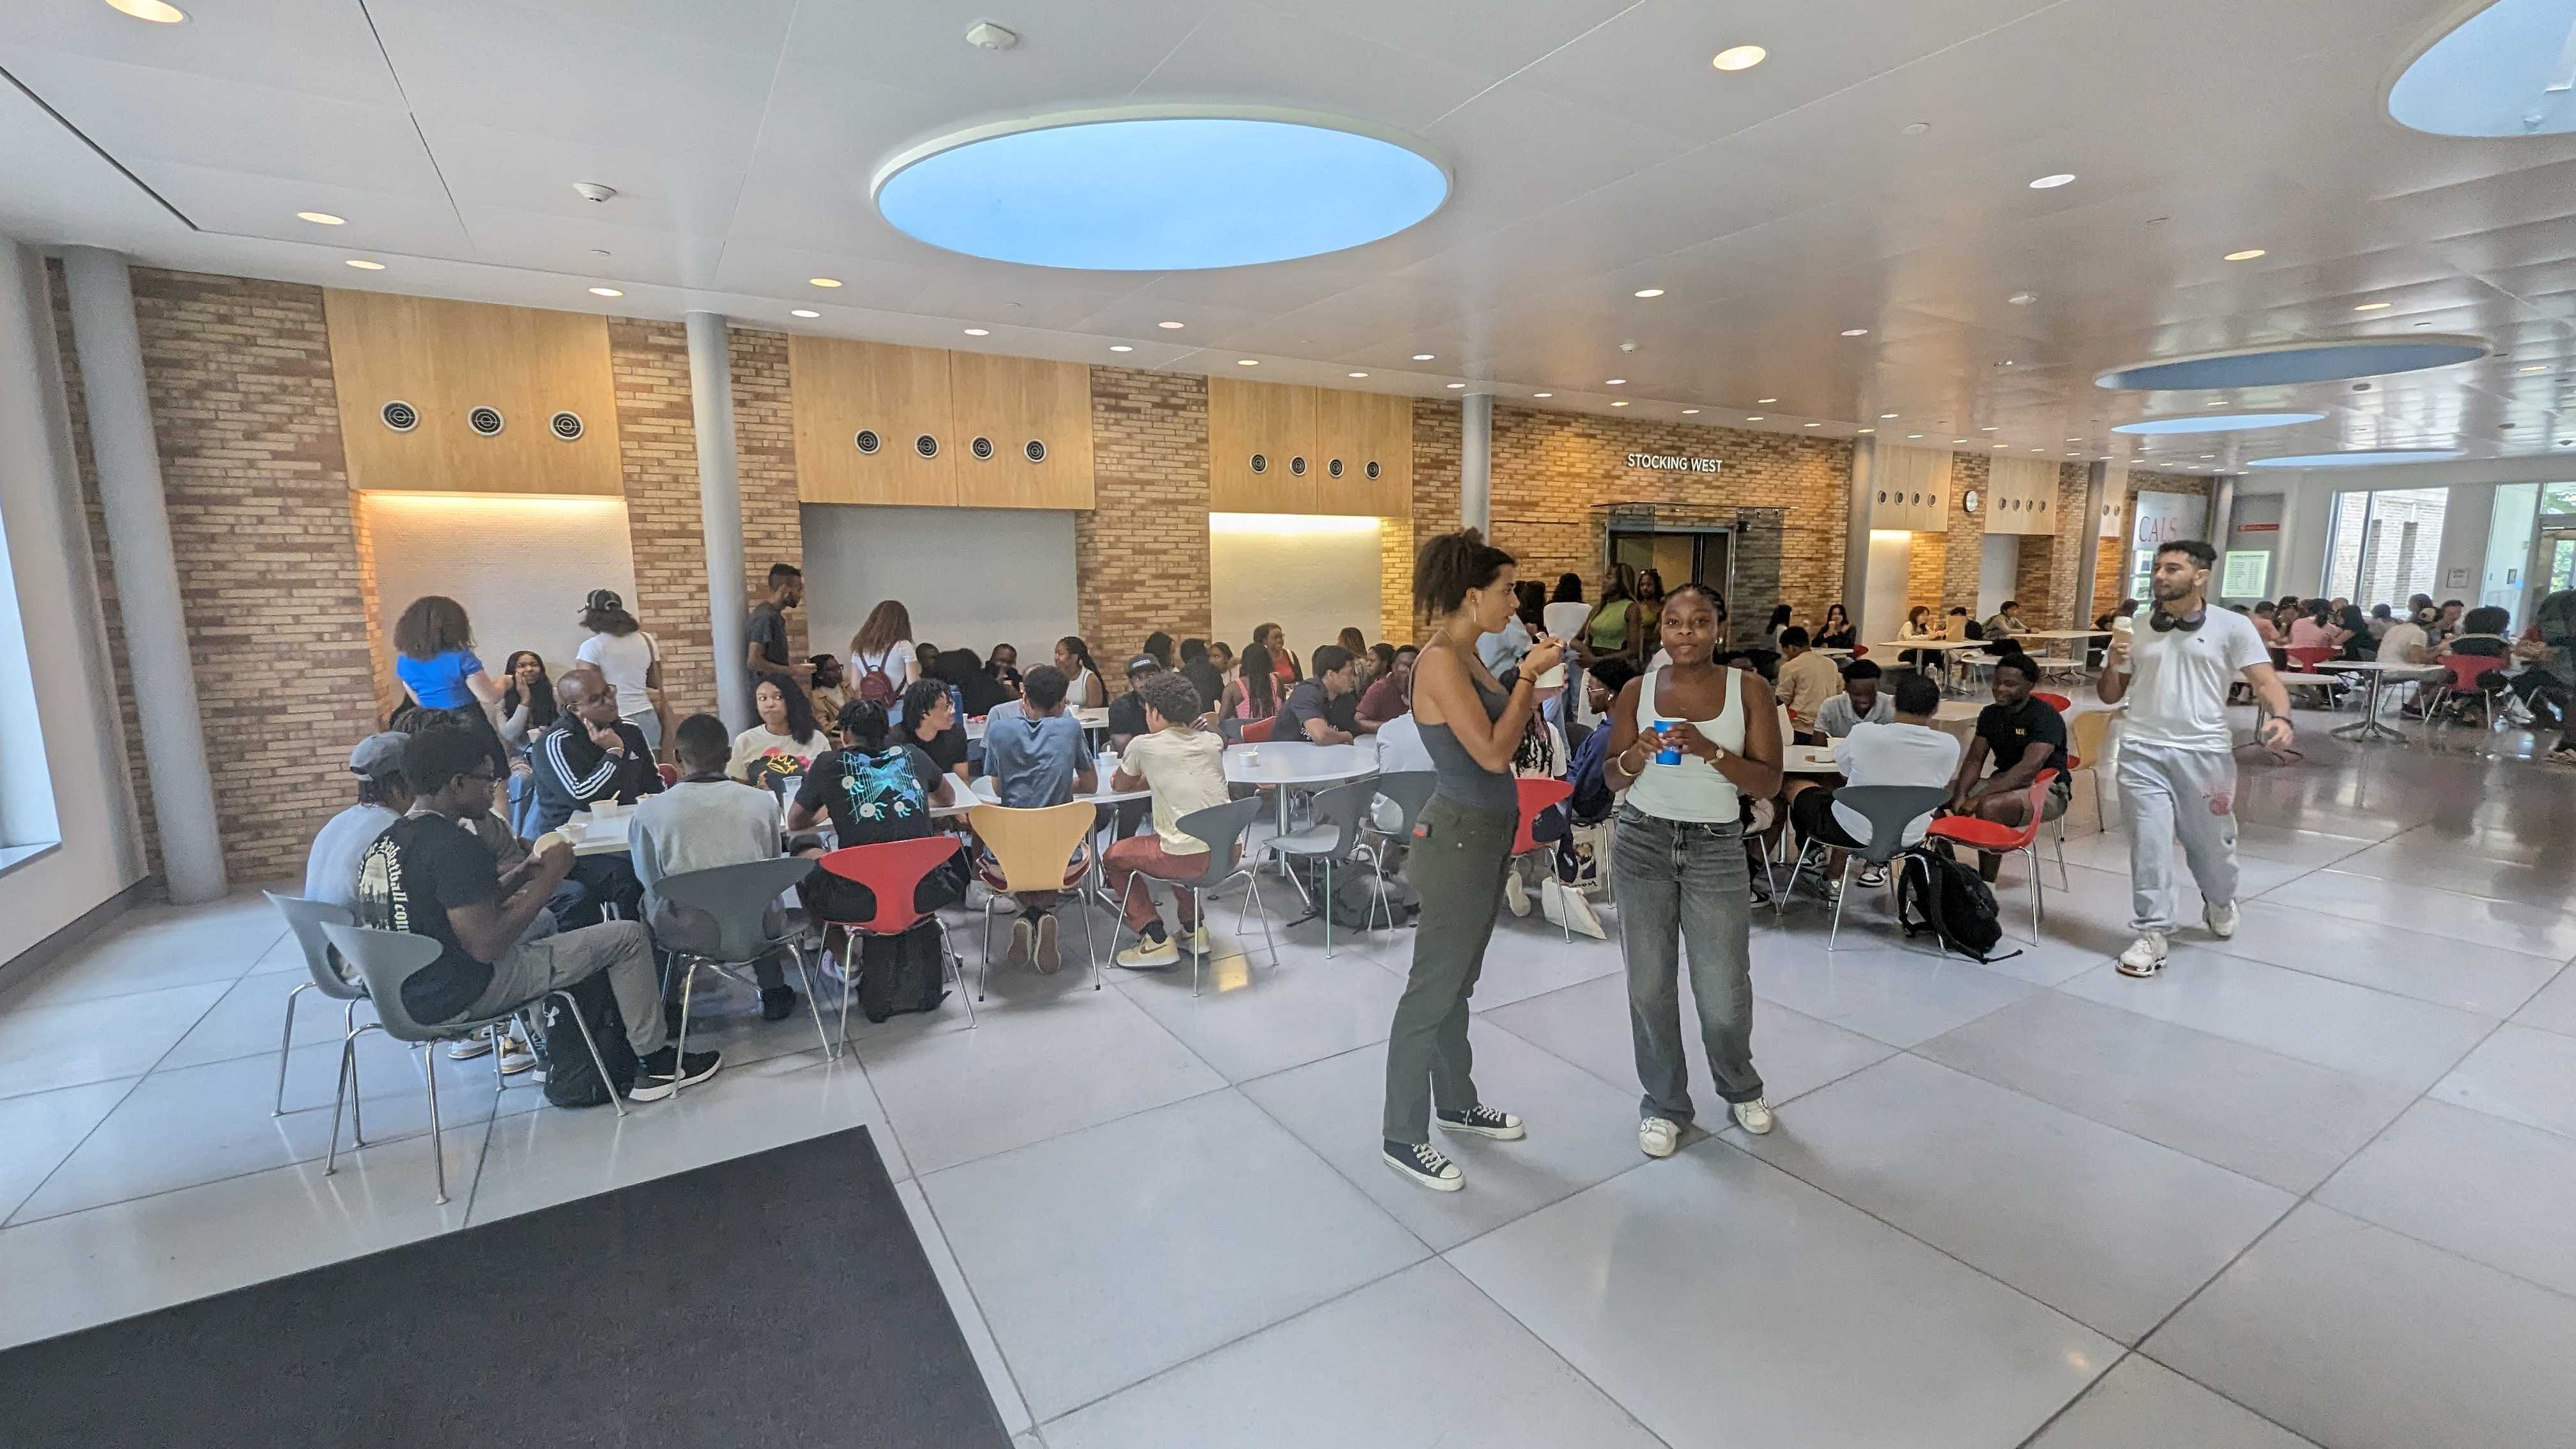 This image slider contains images of NSBE-CU's Ice Cream Social event. The first image of this slider displays a group of students sitting at the Cornell Dairy Bar, sitting at several tables and conversing amongst each other.